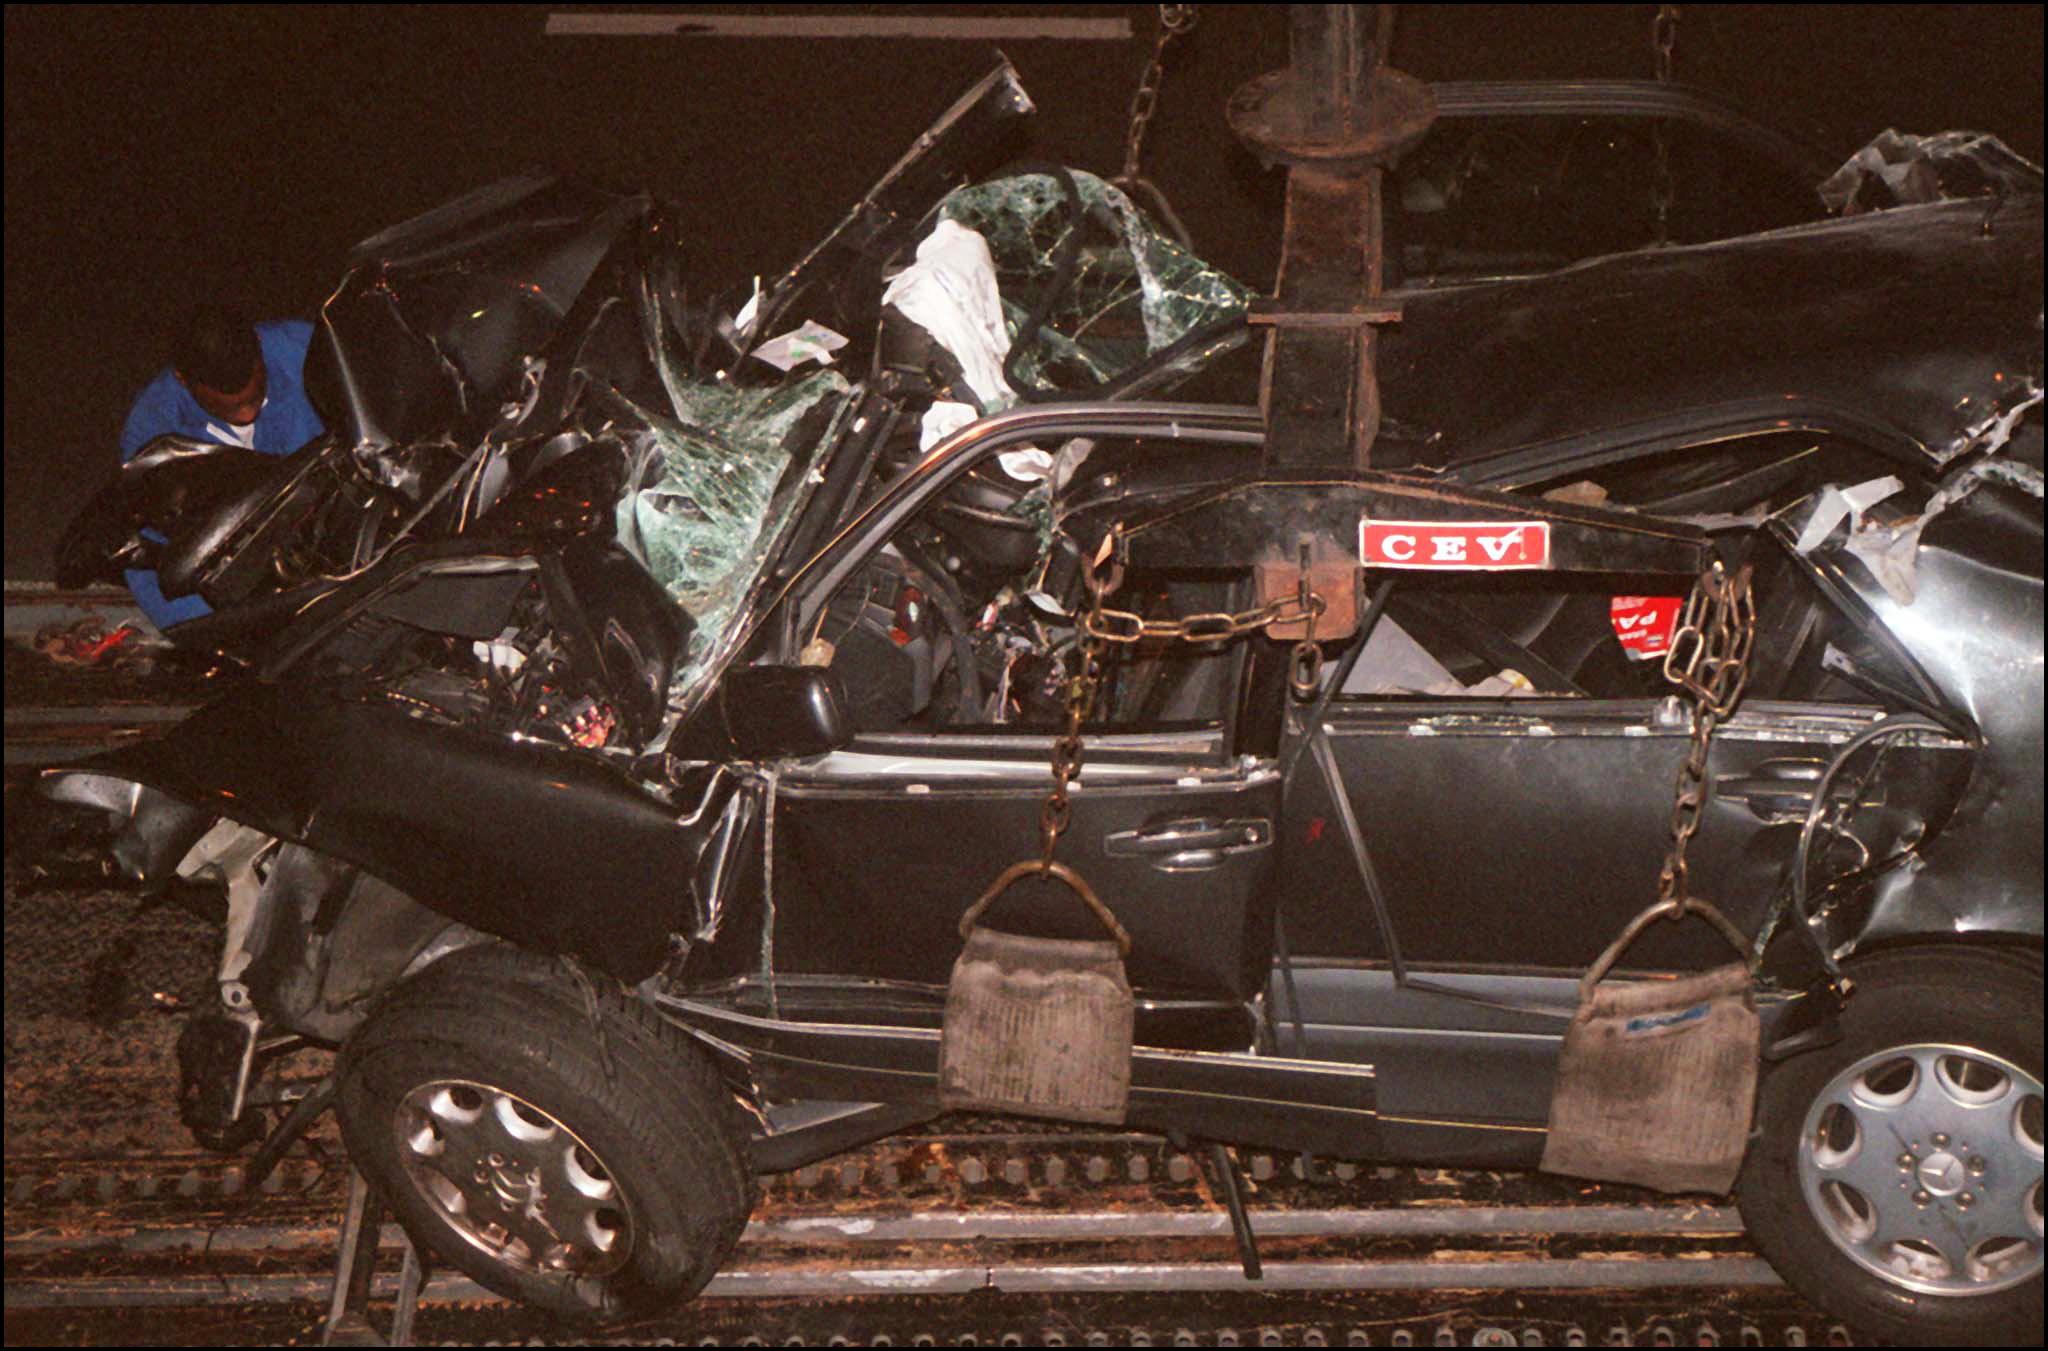 PHOTO: Emergency crews work on the wreckage of Princess Diana's car in the Alma tunnel of Paris.